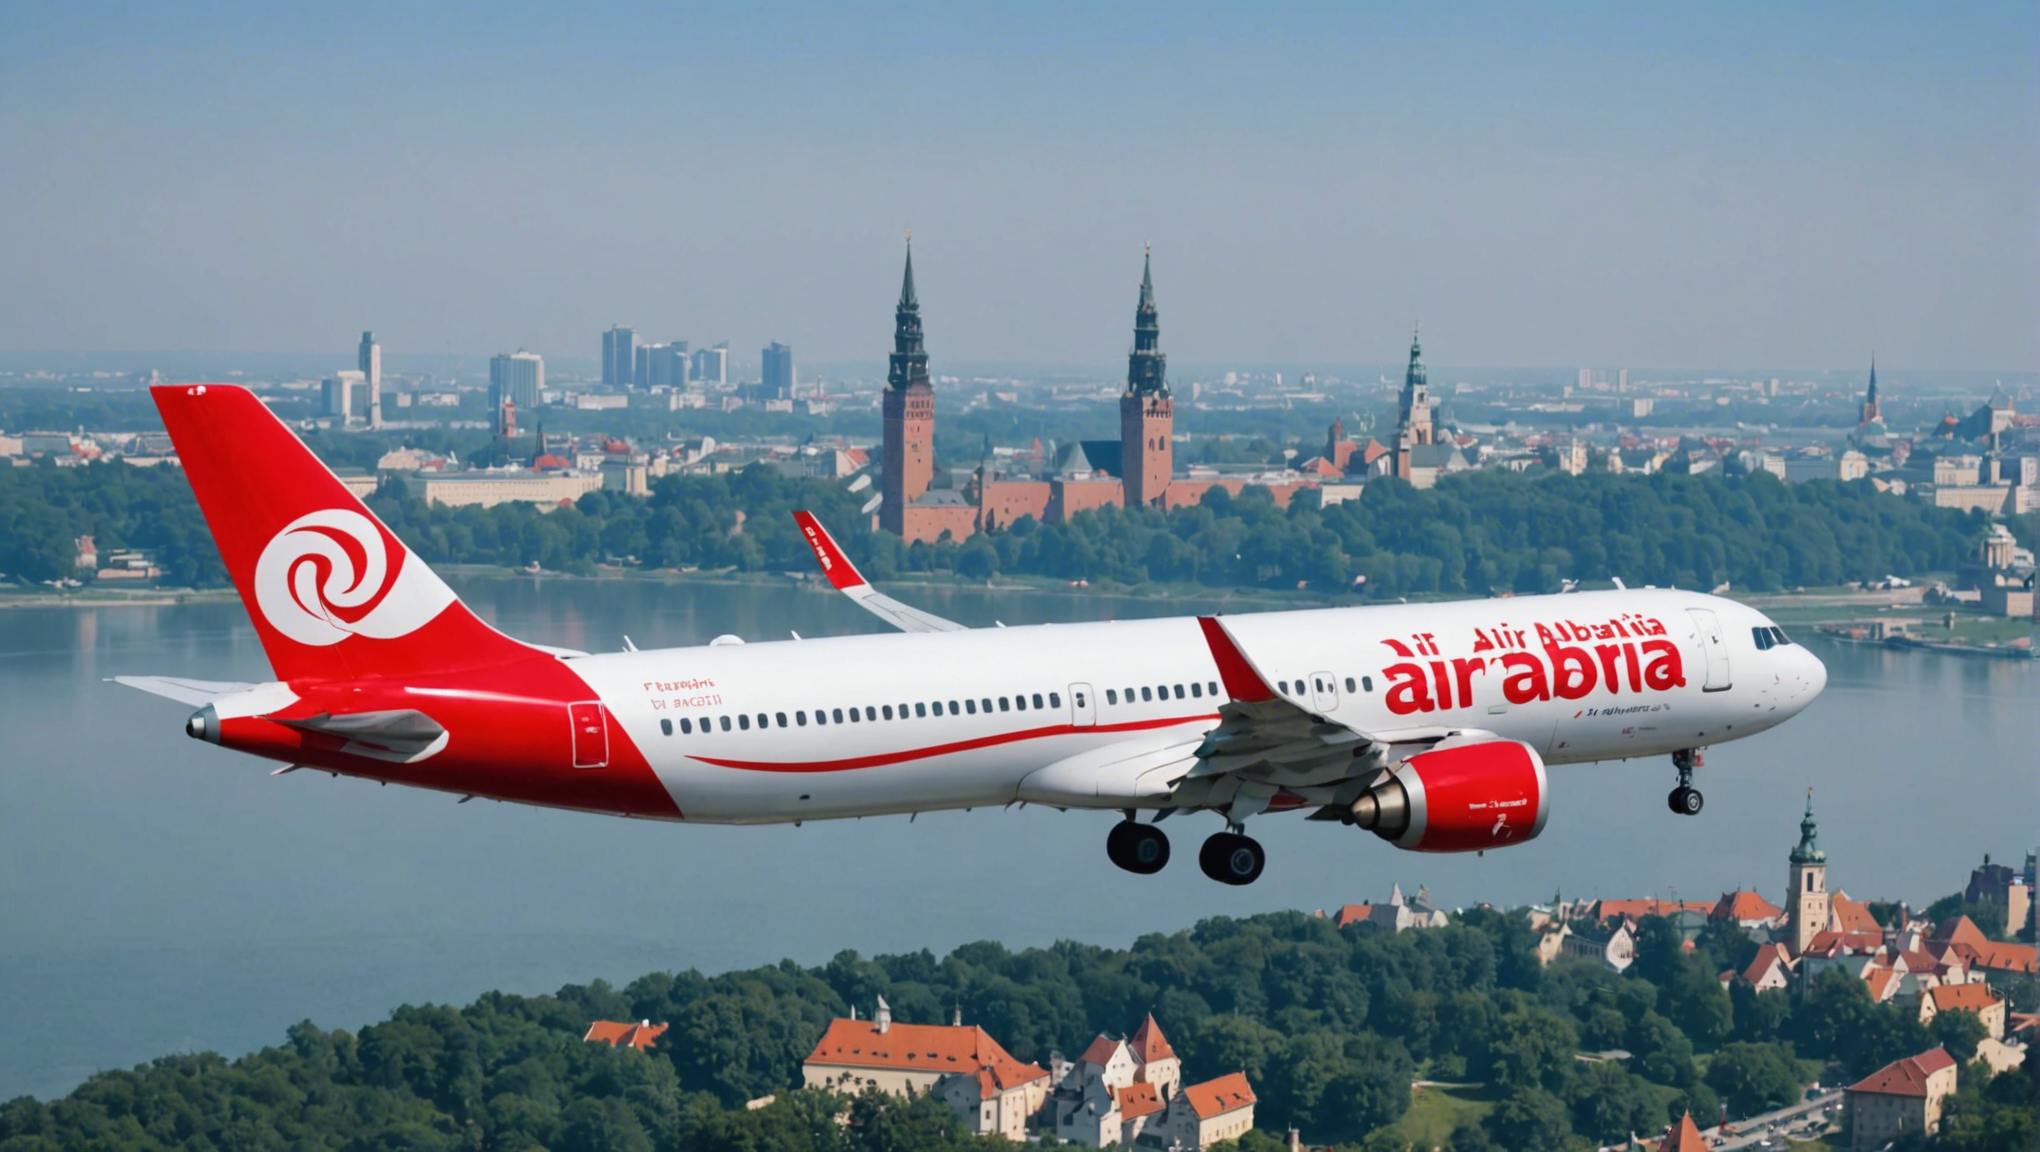 discover air arabia's new european routes with the opening of a new route to krakow, poland.